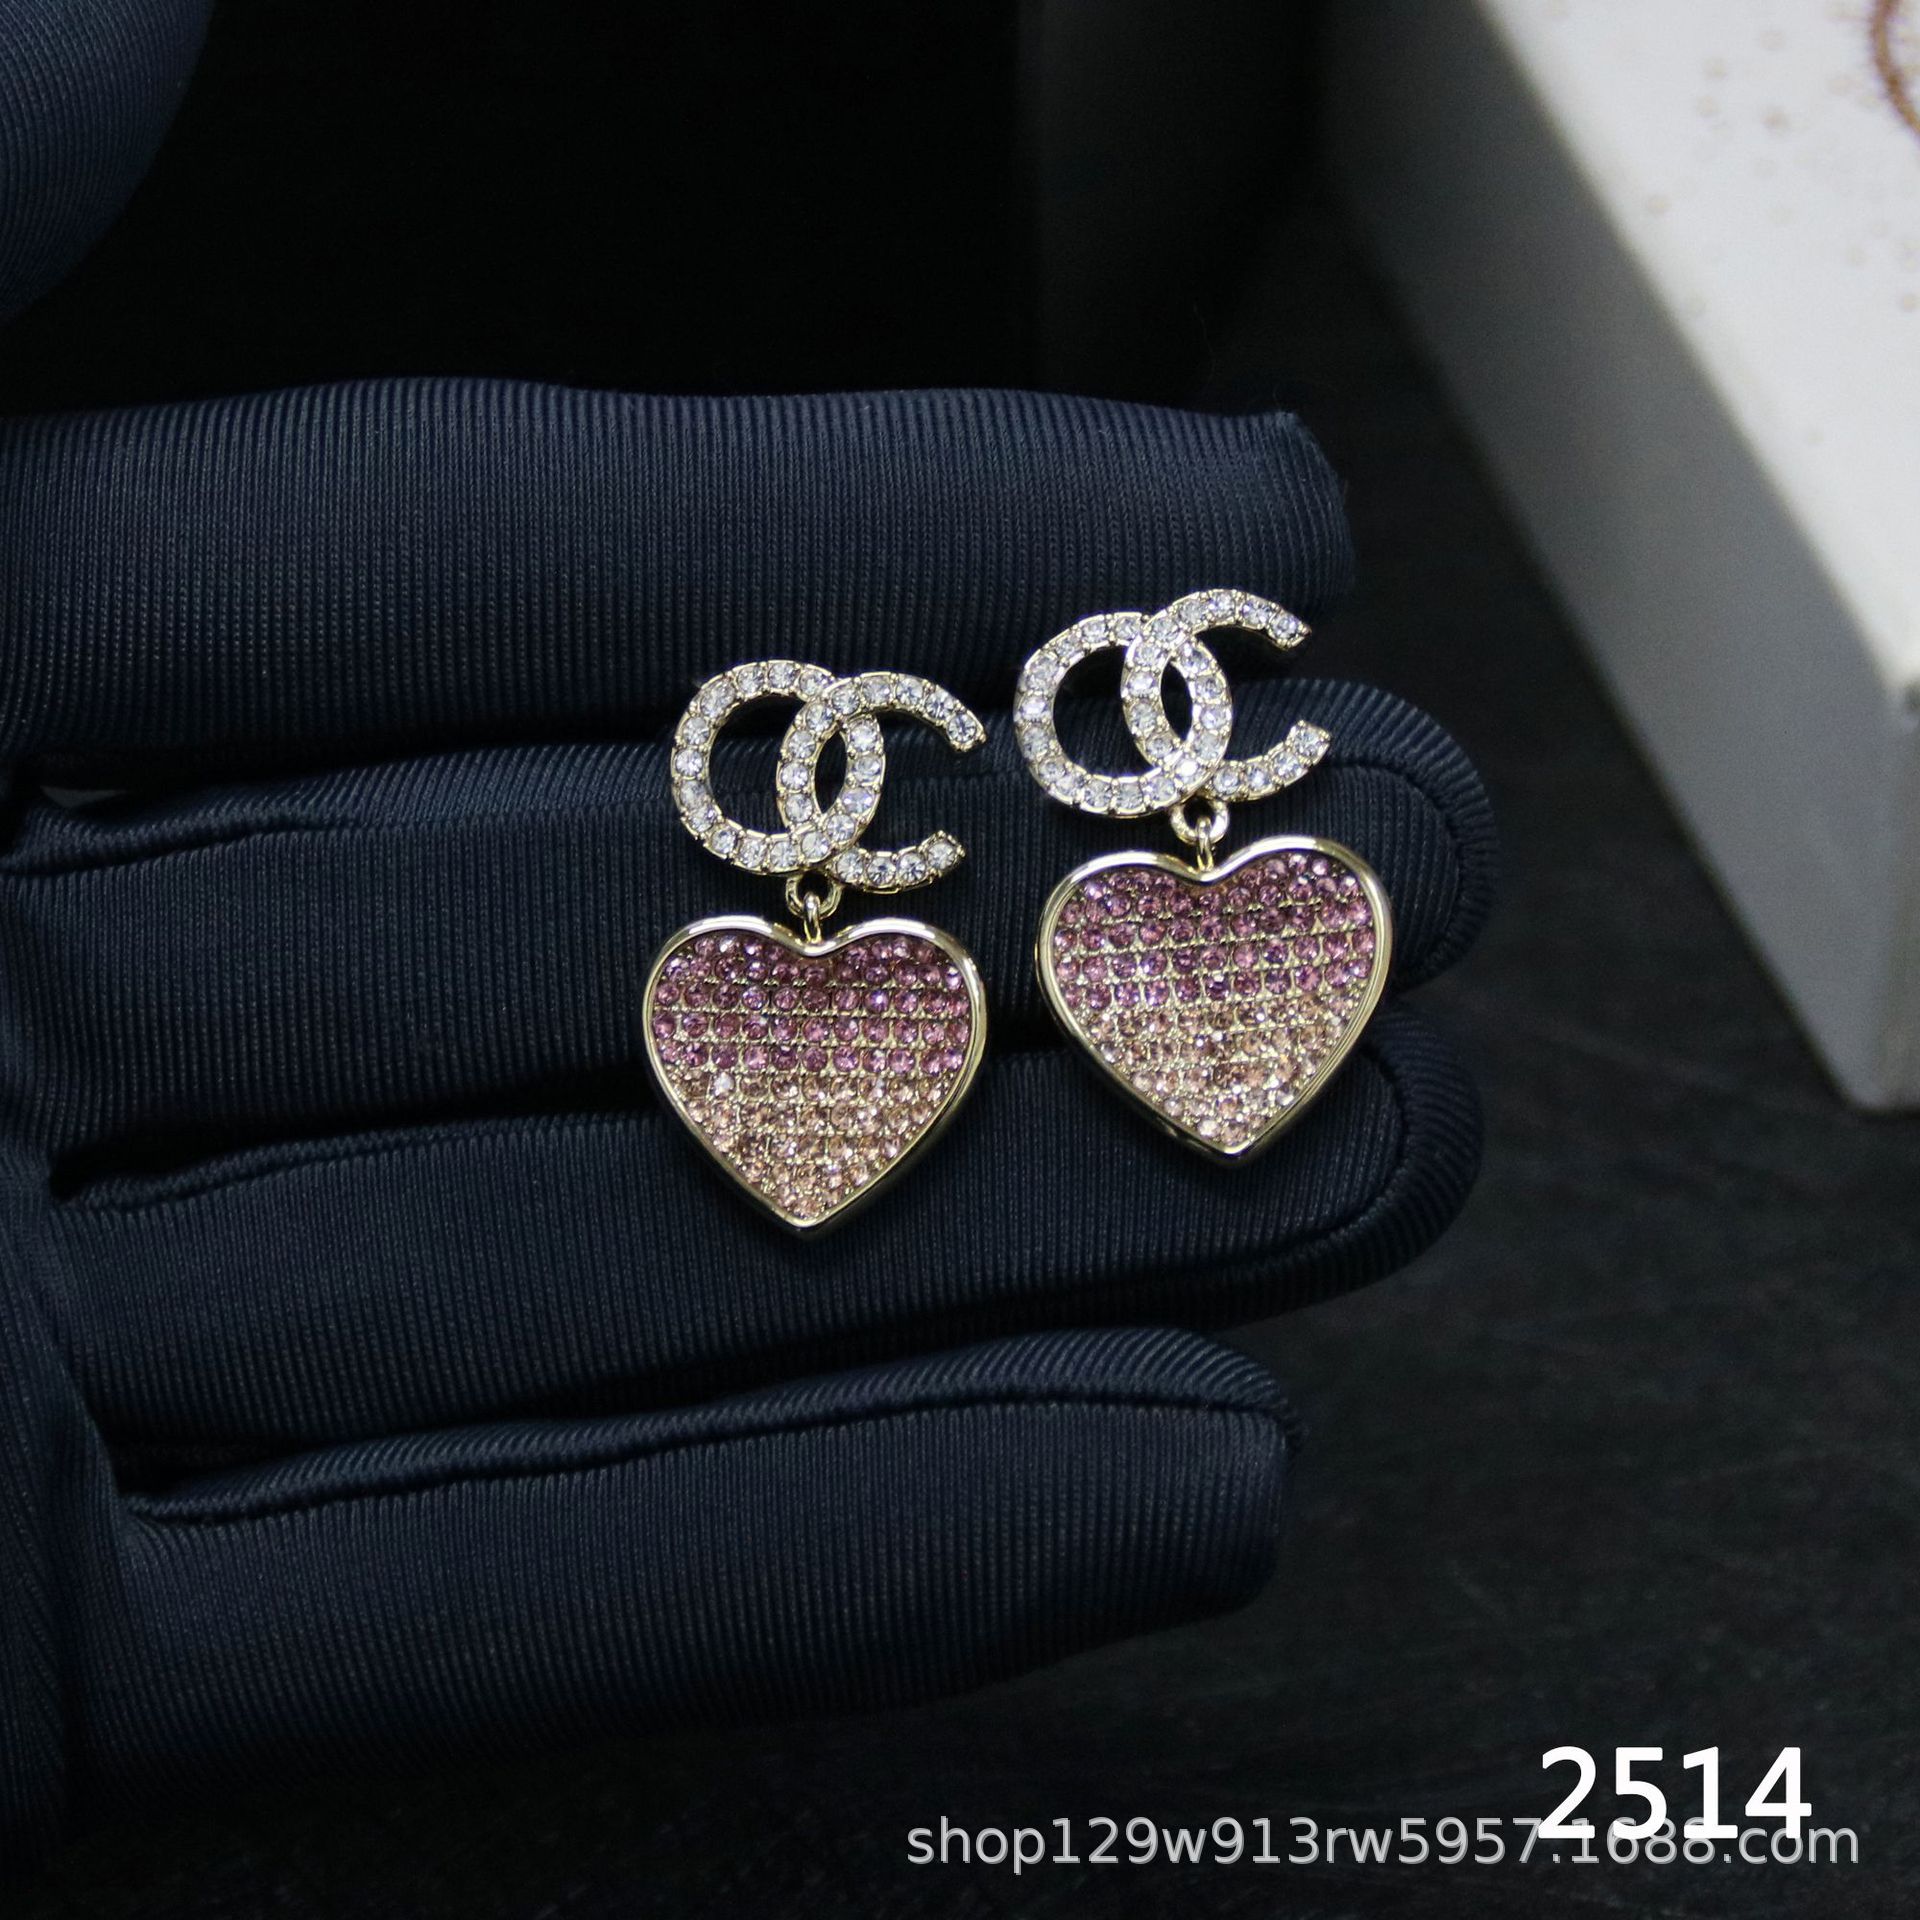 23P Classic Style Pairs C Pink Diamond Heart Shape Bag Ear Stud Earring Chanel-Style Vintage Pearl Square Earrings Women